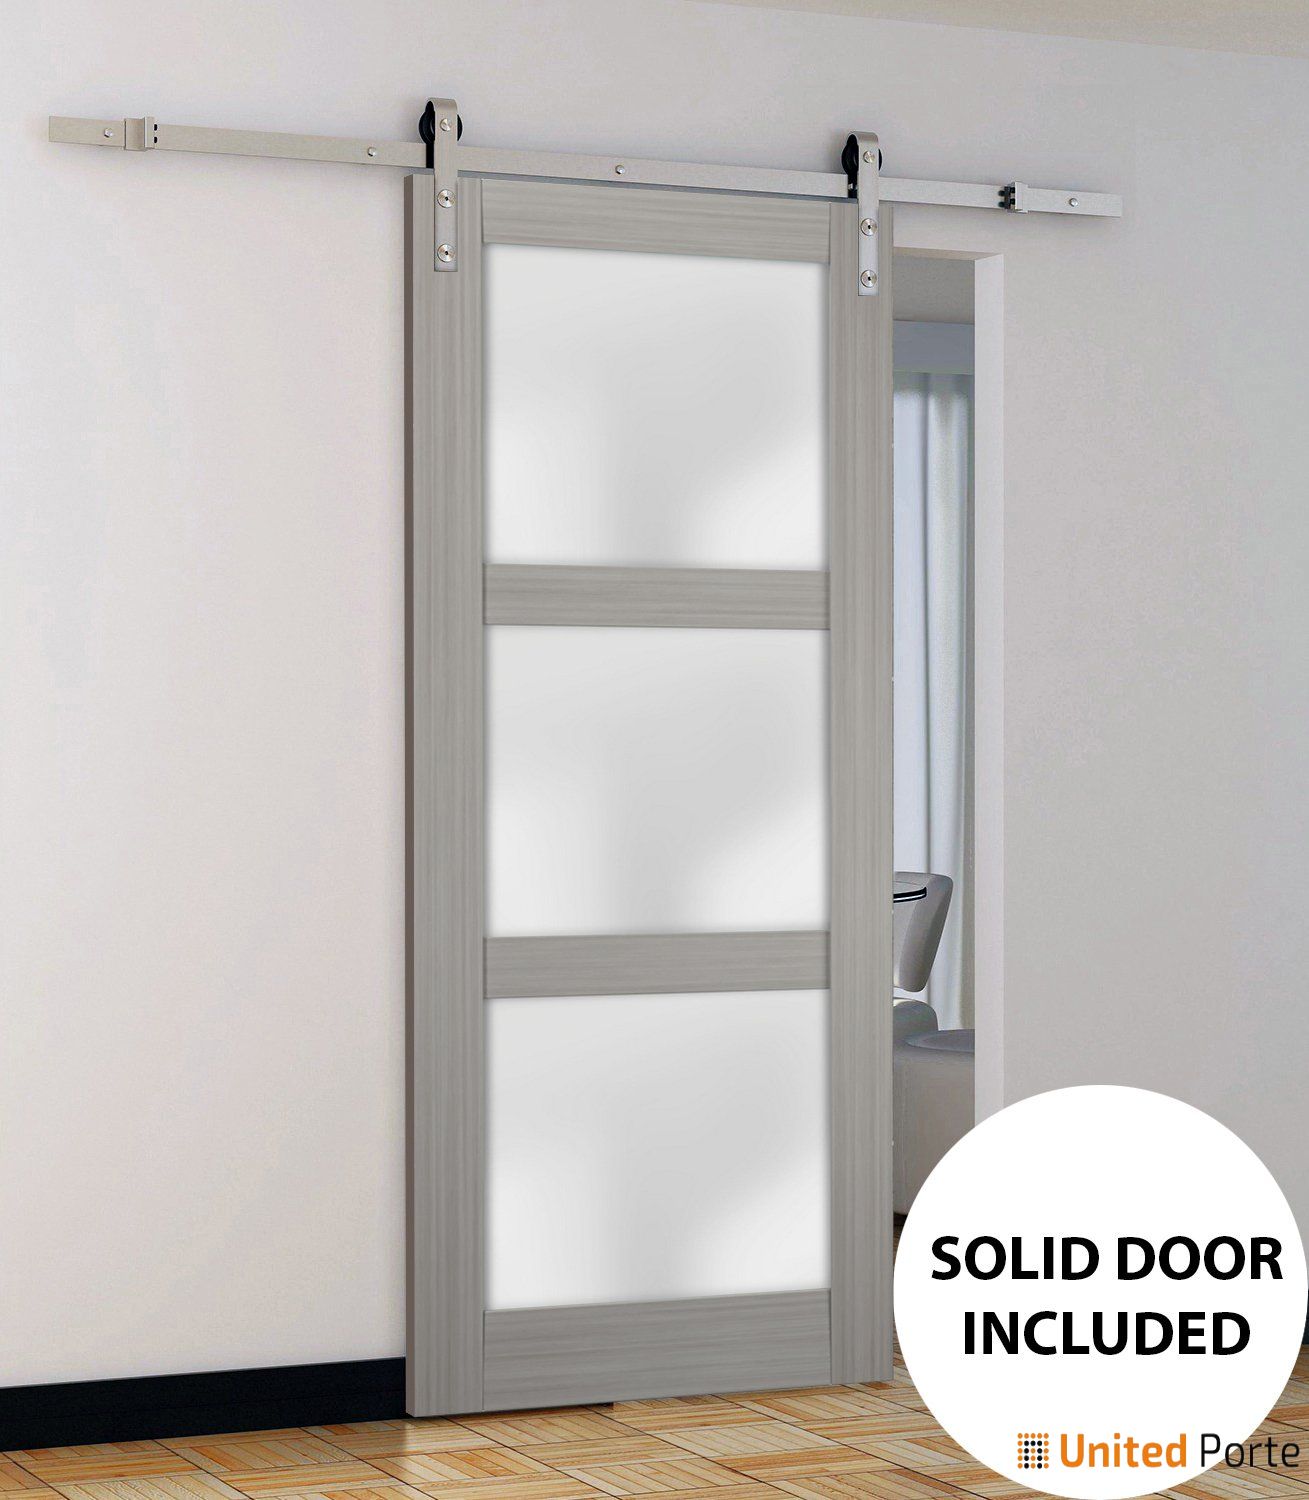 Lucia 2552 Grey Ash Barn Door with Frosted Glass and Stainless Rail